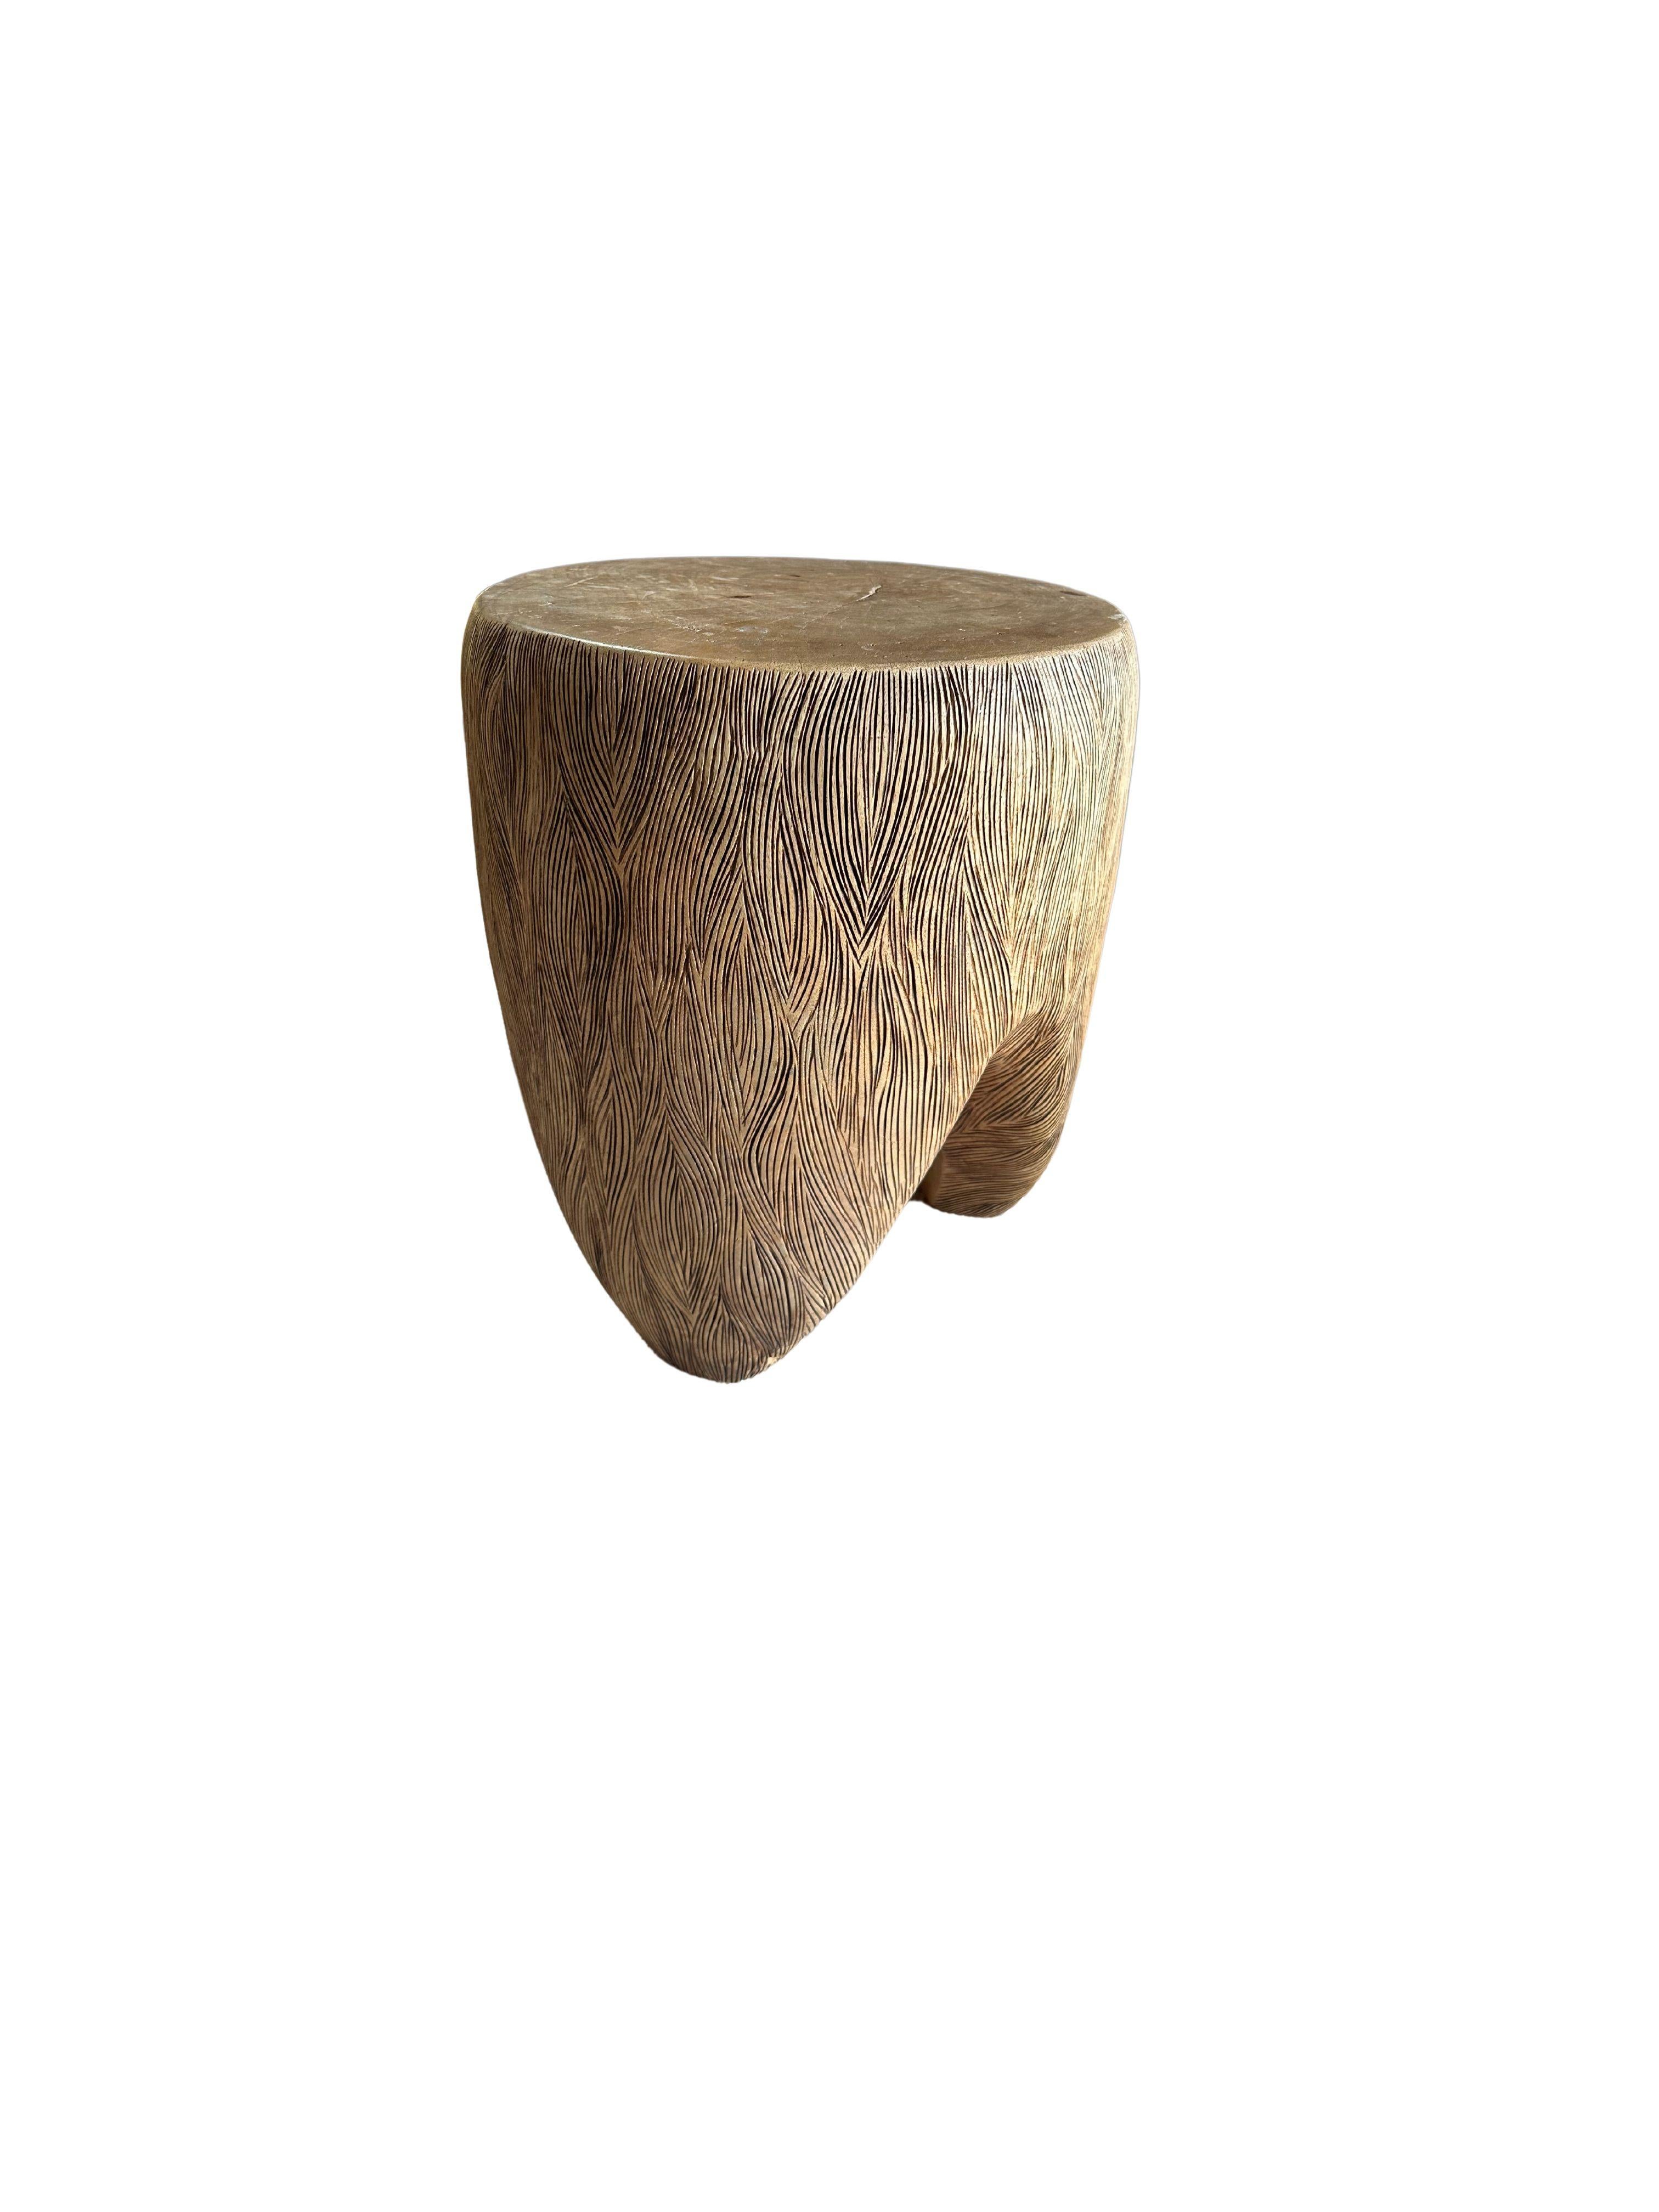 Organic Modern Sculptural Mango Wood Side Table, Hand-Crafted Modern Organic For Sale